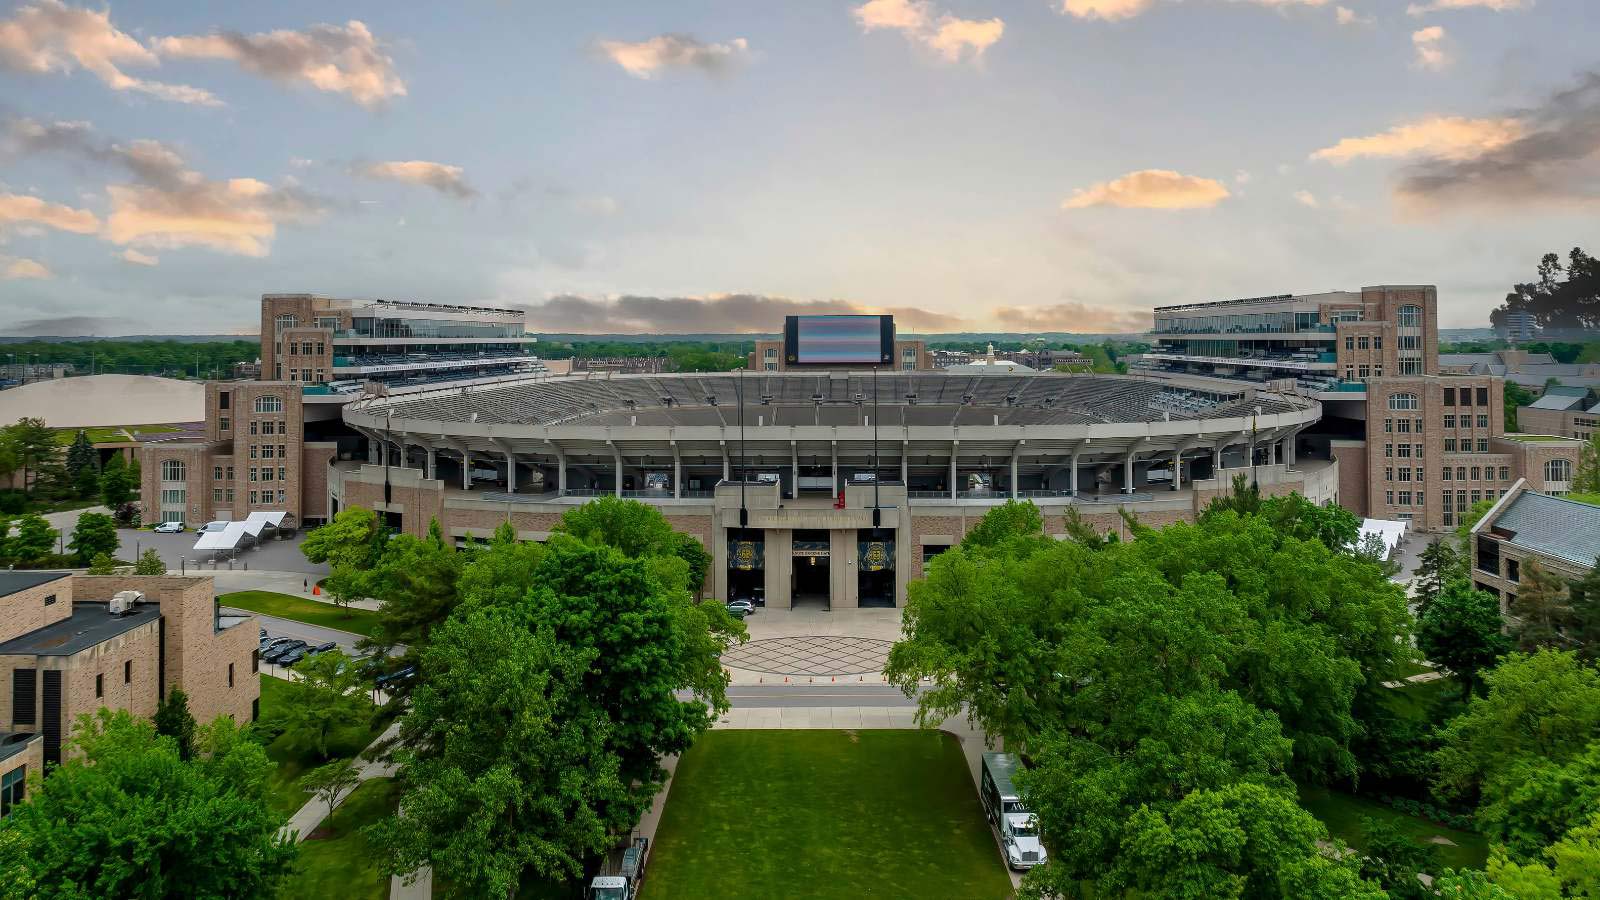 <p>Notre Dame Stadium is the home of the Fighting Irish and is a fantastic place to see a college football game. It is considered by many to be the most historic football stadium in the country. If you’re a college football fan, this is a must-see destination.</p>